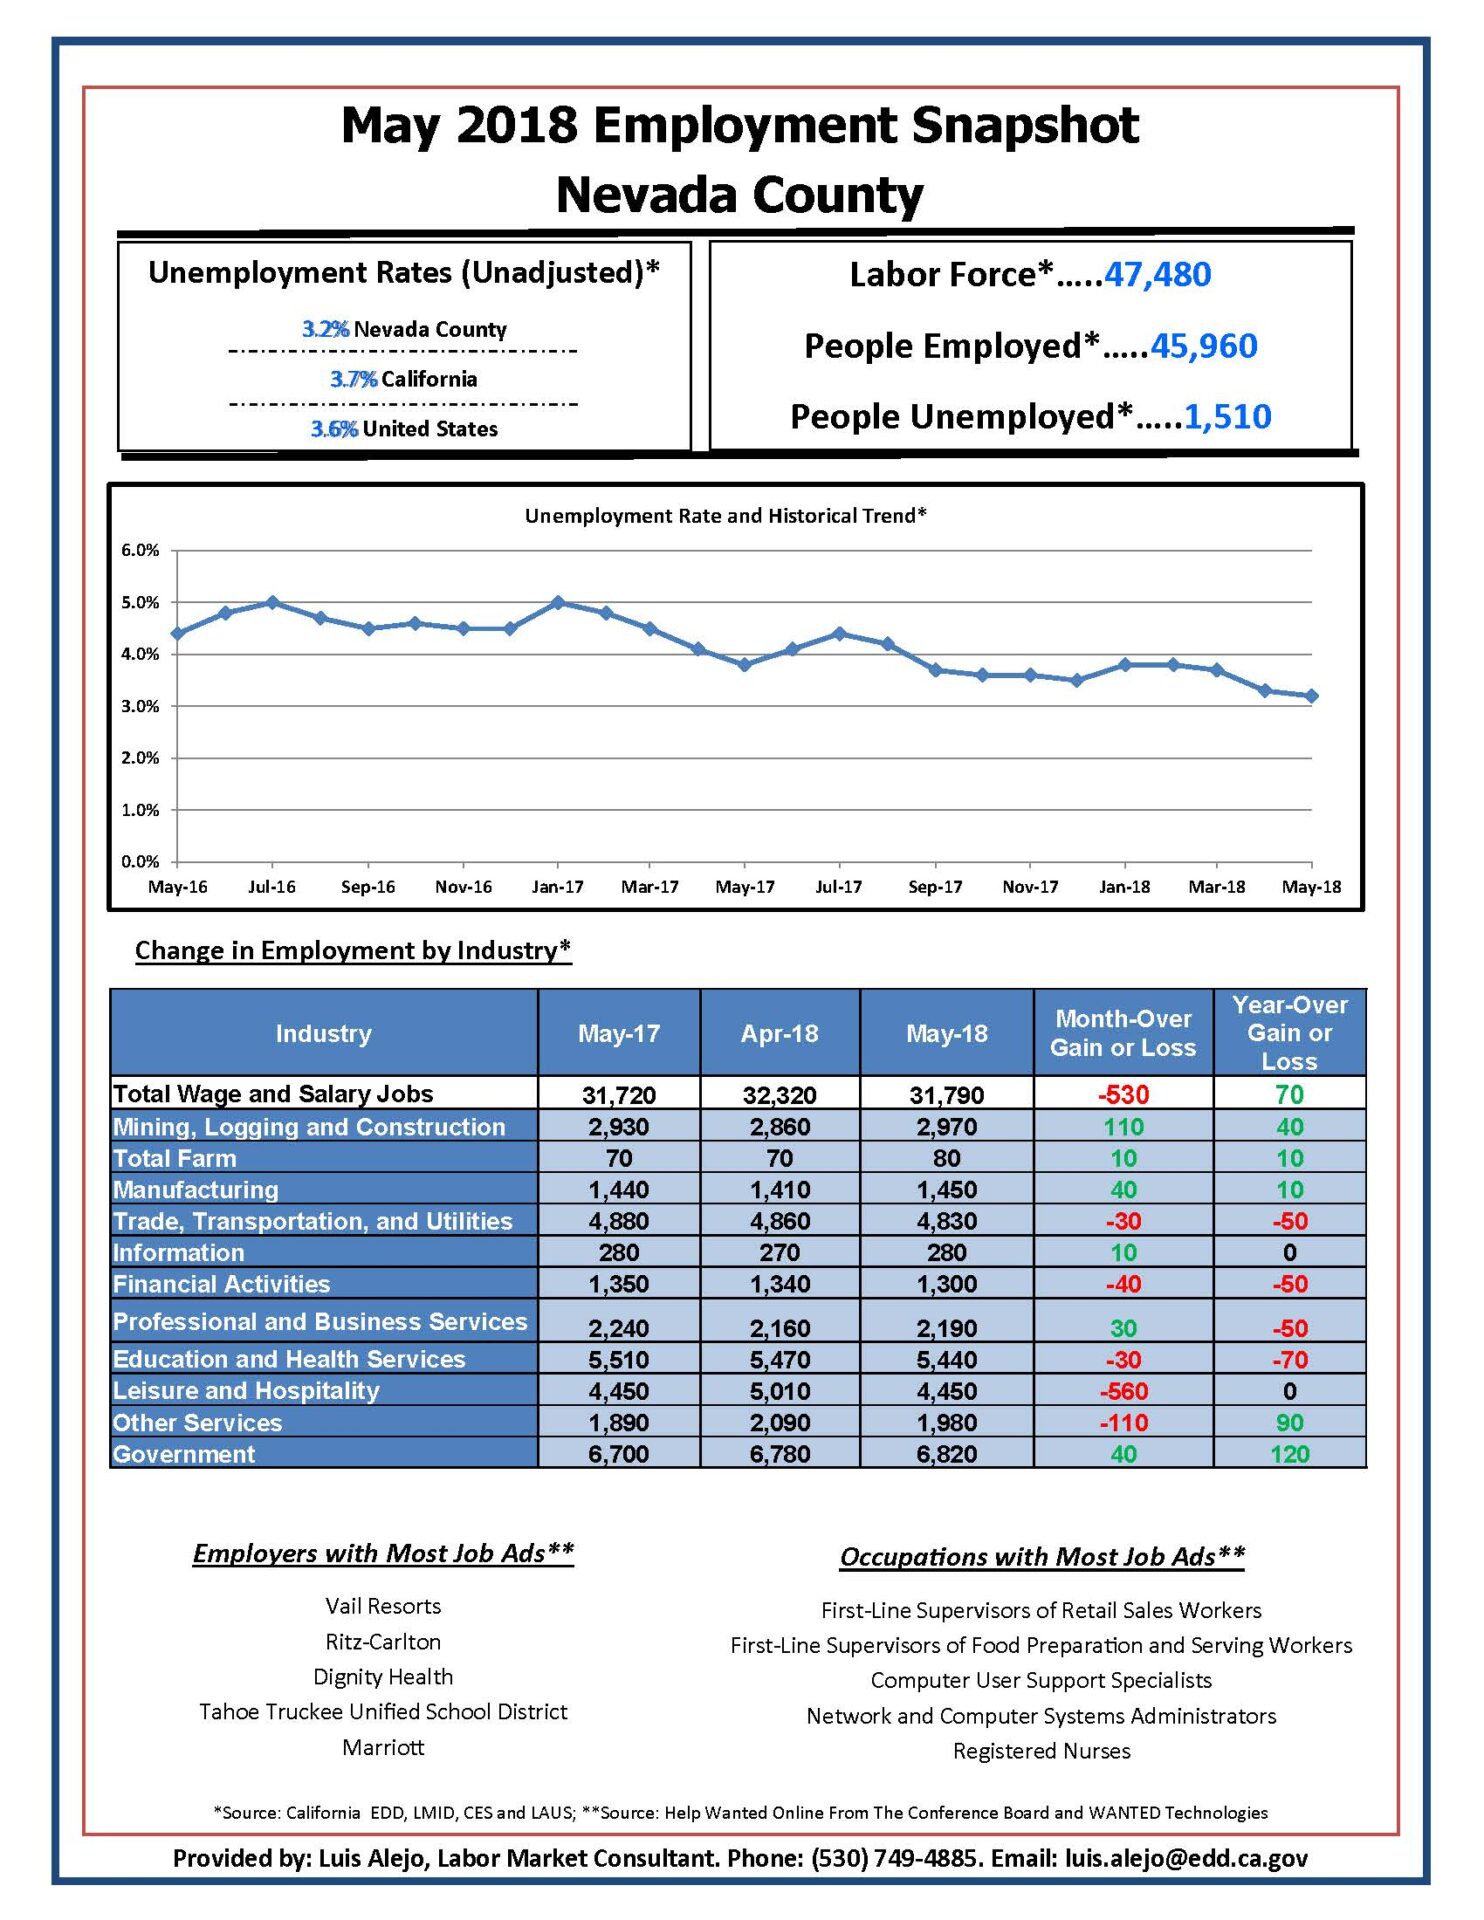 Nevada County Employment Snapshot for May 2018 Numbers